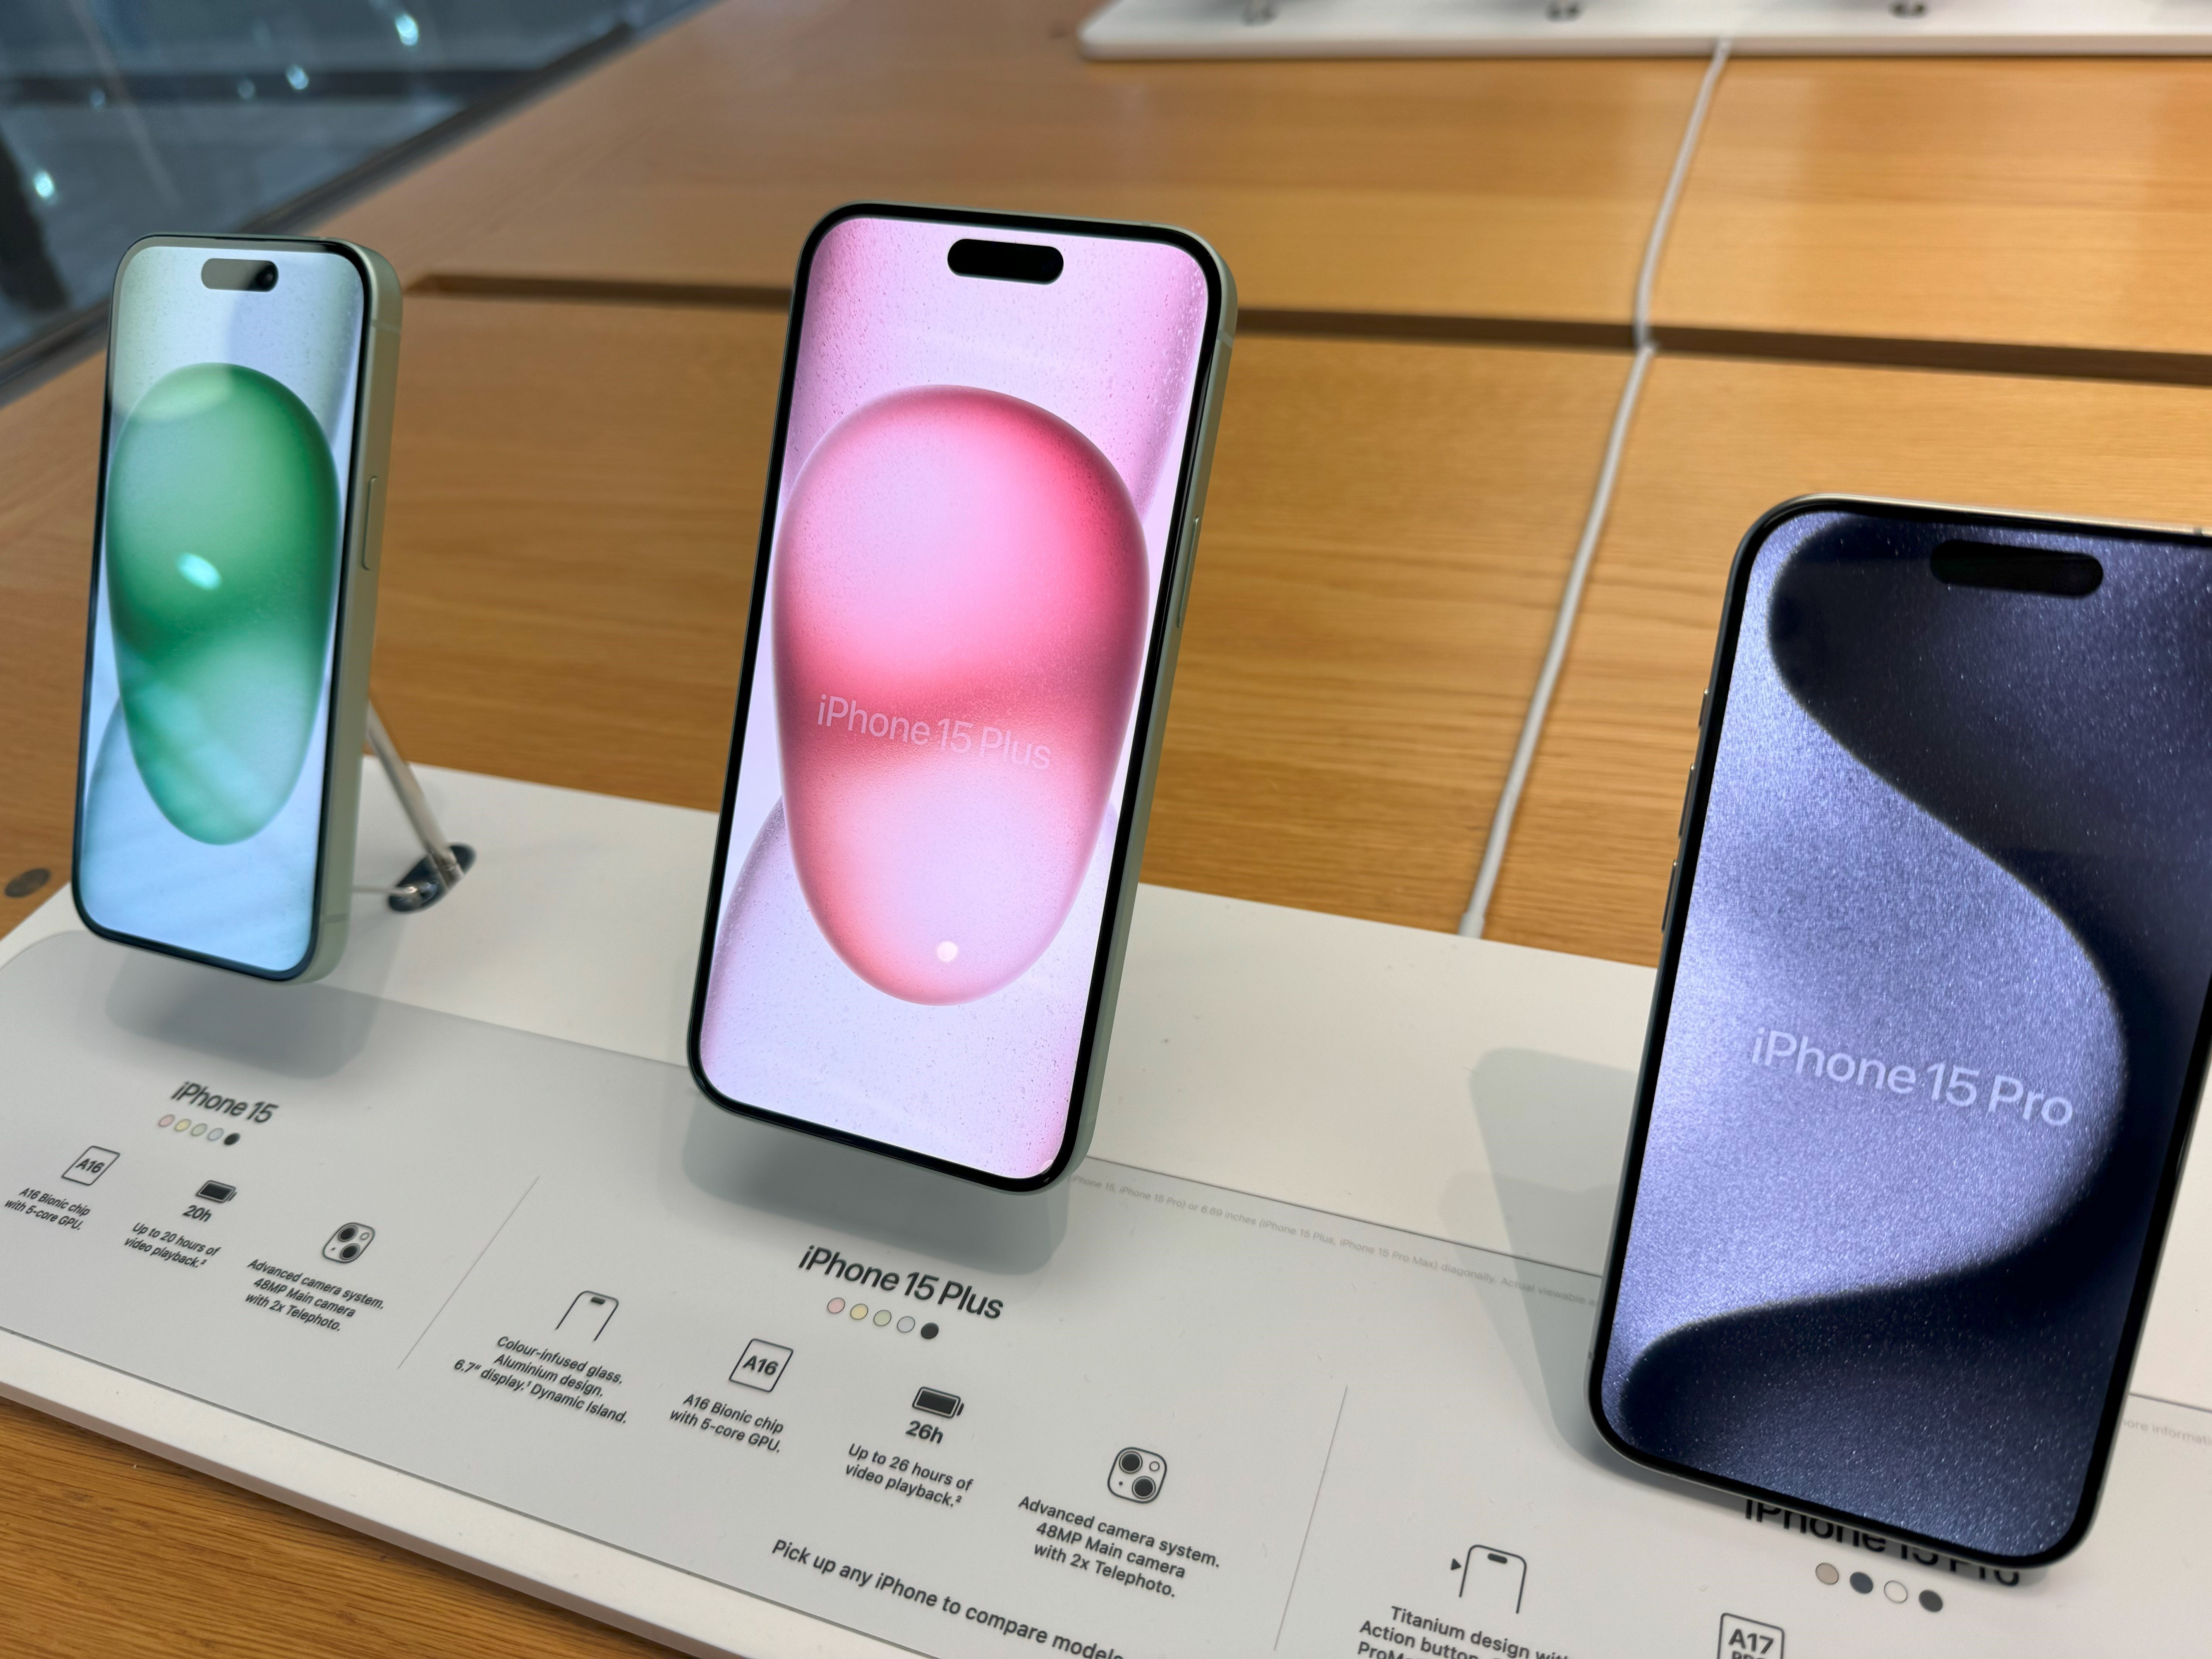 Iphone product sales dive 19.1% in China as Huawei comeback hits Apple within the excessive conclusion • The Signal-up